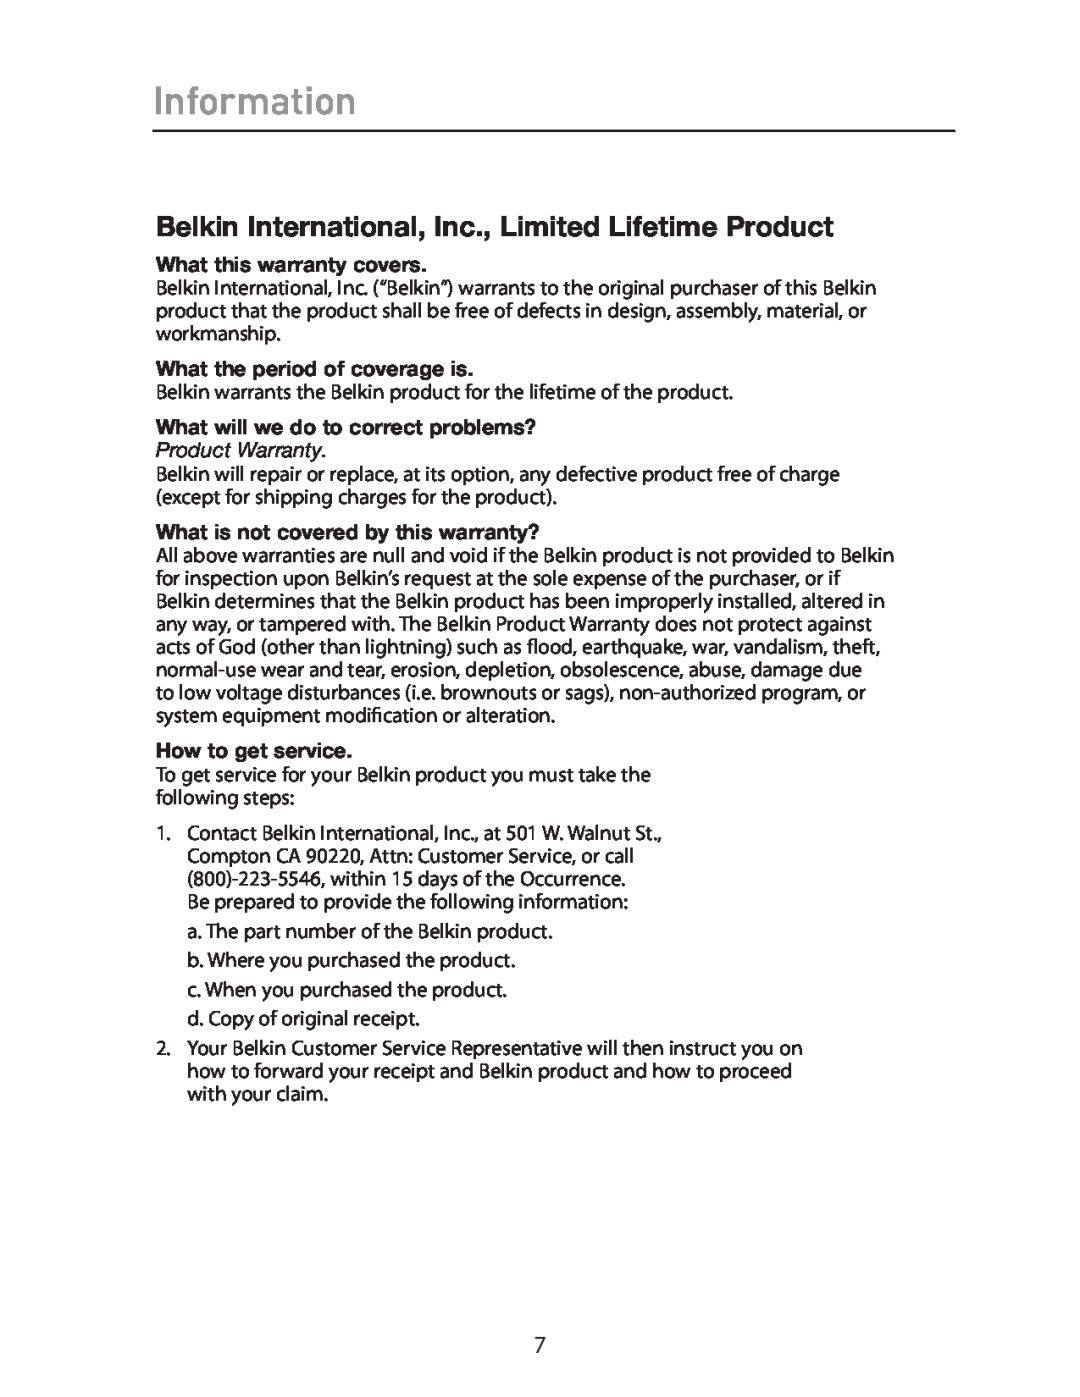 Belkin P75470ea manual Information, Belkin International, Inc., Limited Lifetime Product, What this warranty covers 